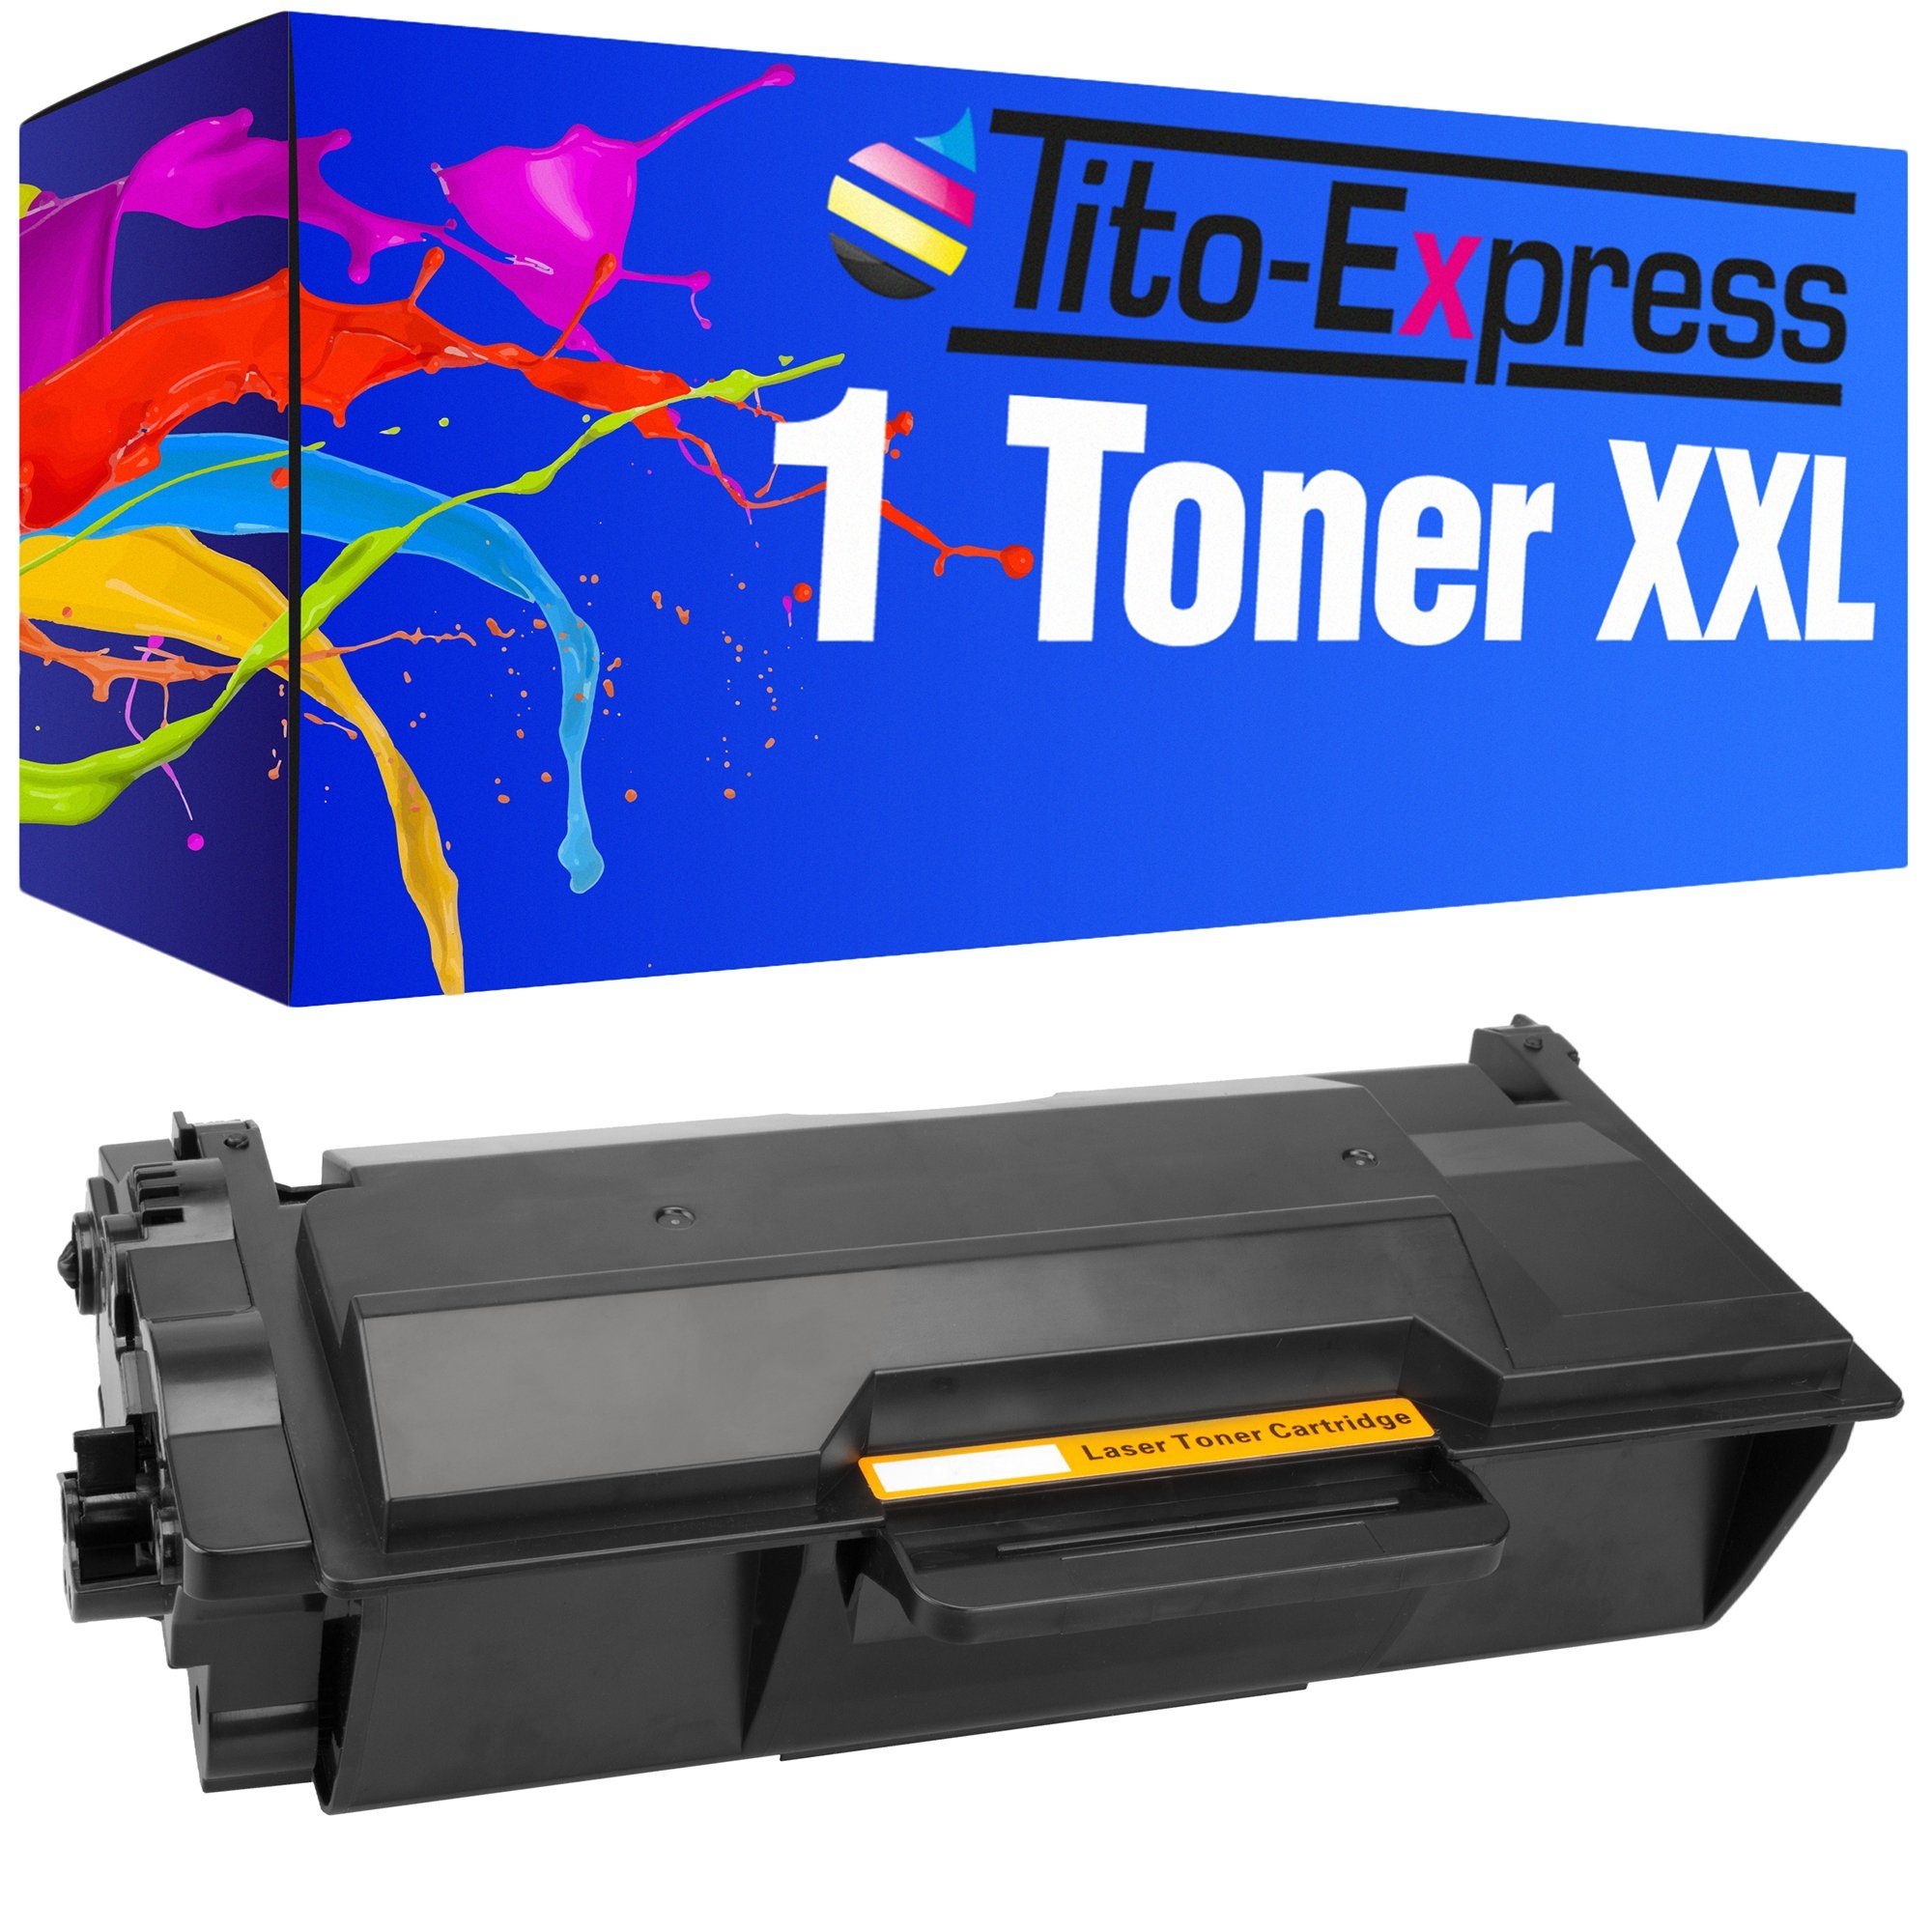 Tito-Express PlatinumSerie Tonerpatrone ersetzt Toner Brother TN-3480  Brother TN 3480 BrotherTN3480 Black, für HL-L5100DN MFC-L5750DW MFC-L5700DW  HL-L5200DW HL-L5000D